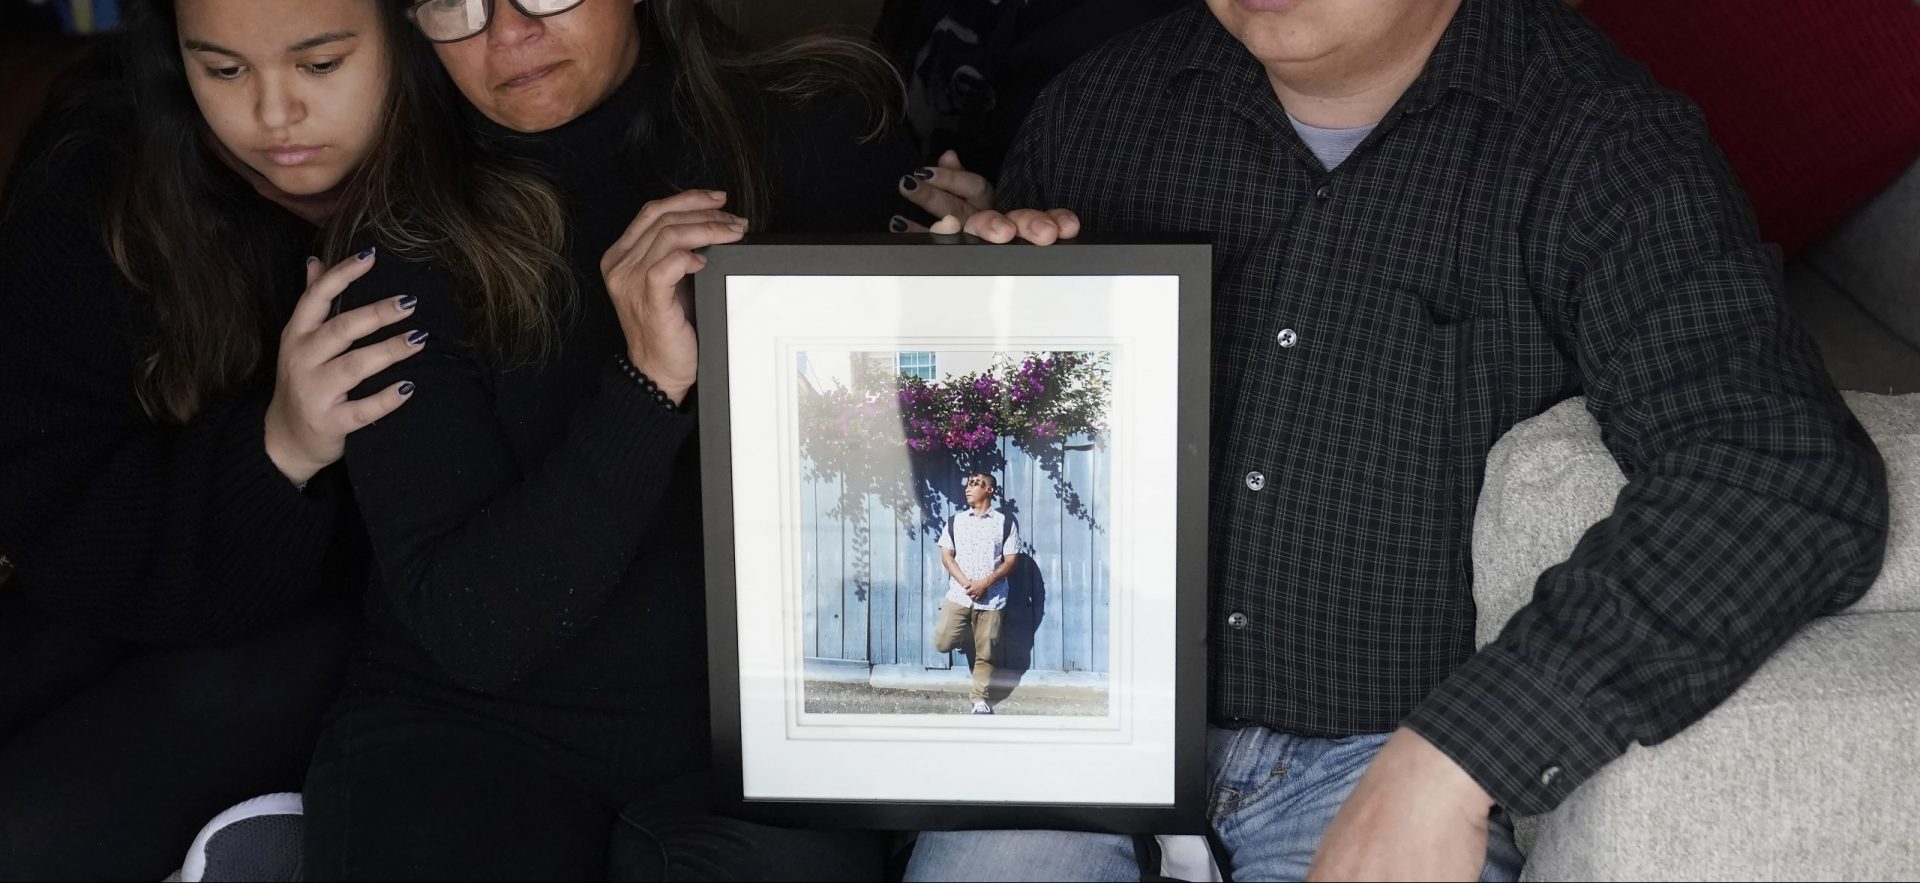 Cassandra Quinto-Collins, second from left, holds a photo of her son, Angelo Quinto, while sitting with daughter Bella Collins, left, son Andrei Quinto, center, and husband Robert Collins during an interview in Antioch, Calif., Tuesday, March 16, 2021. Angelo Quinto died three days after being restrained on Dec. 23, 2020, in police custody while having a mental health crisis. Lawmakers in several states are proposing legislation that would require more training for police in how to interact with someone in a mental crisis following some high-profile deaths. 